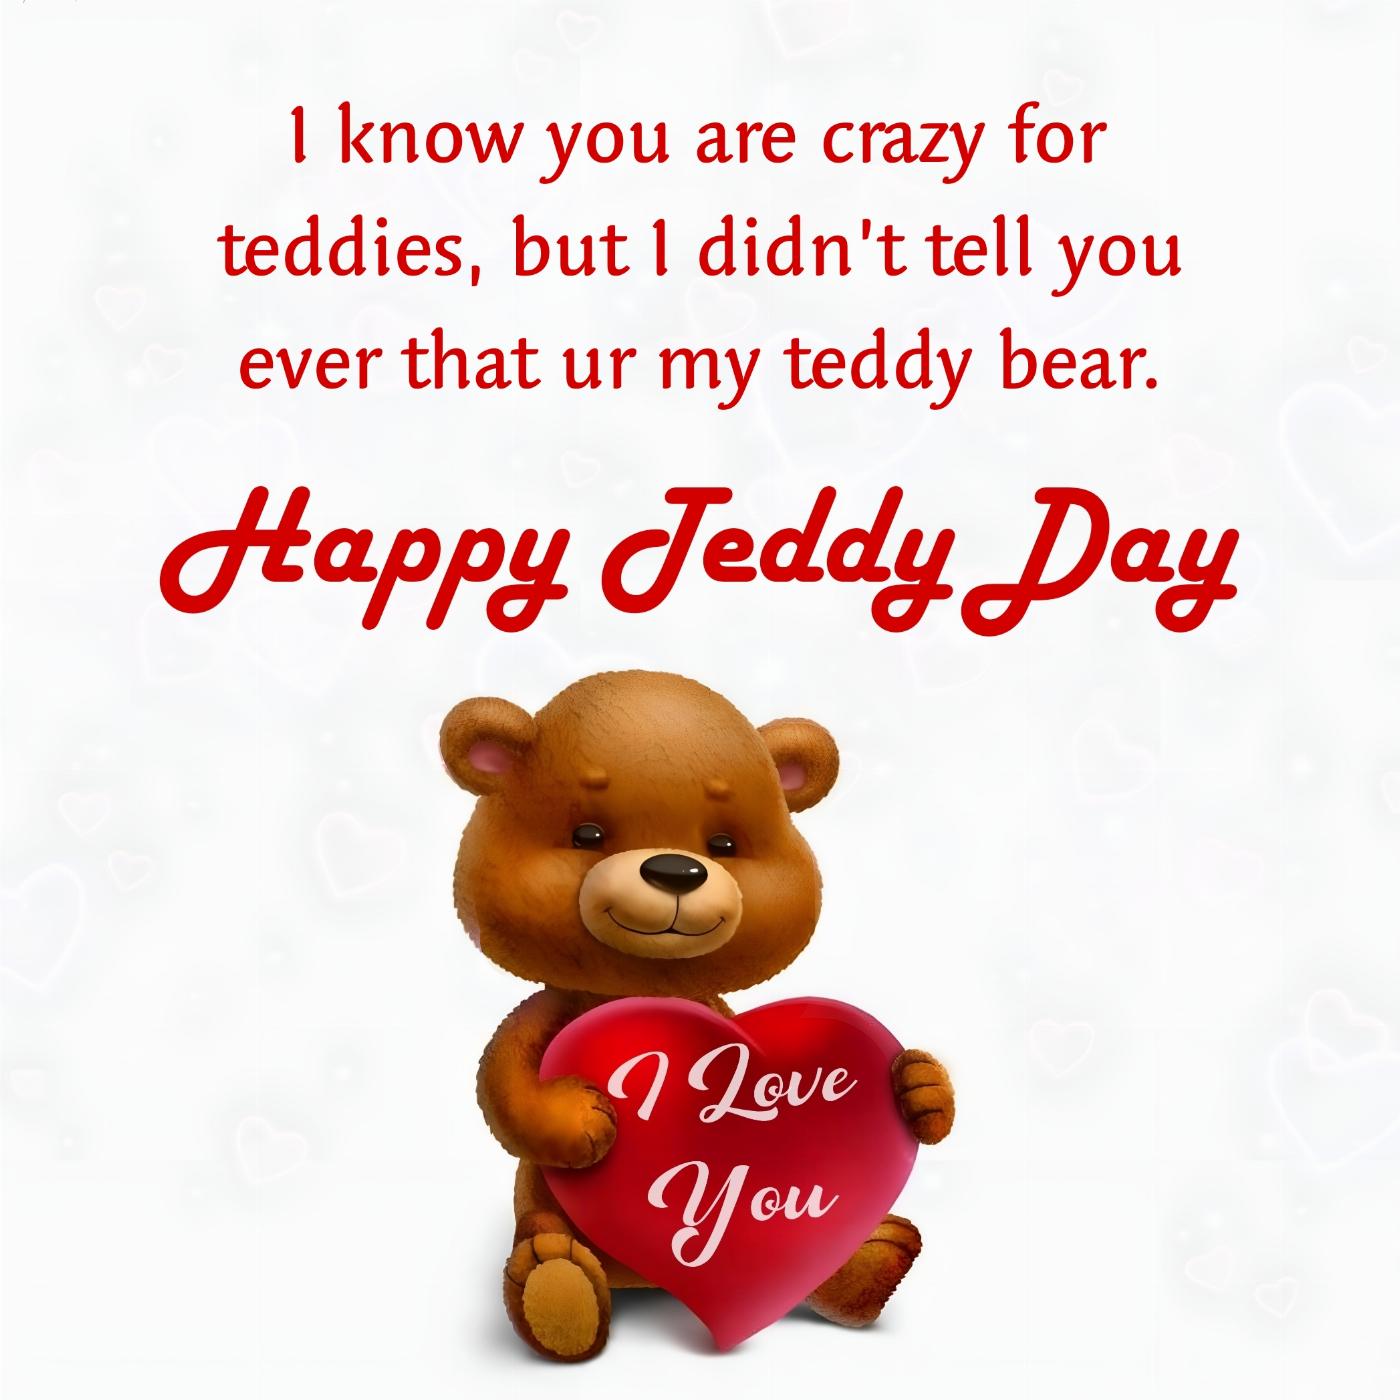 I know you are crazy for teddies